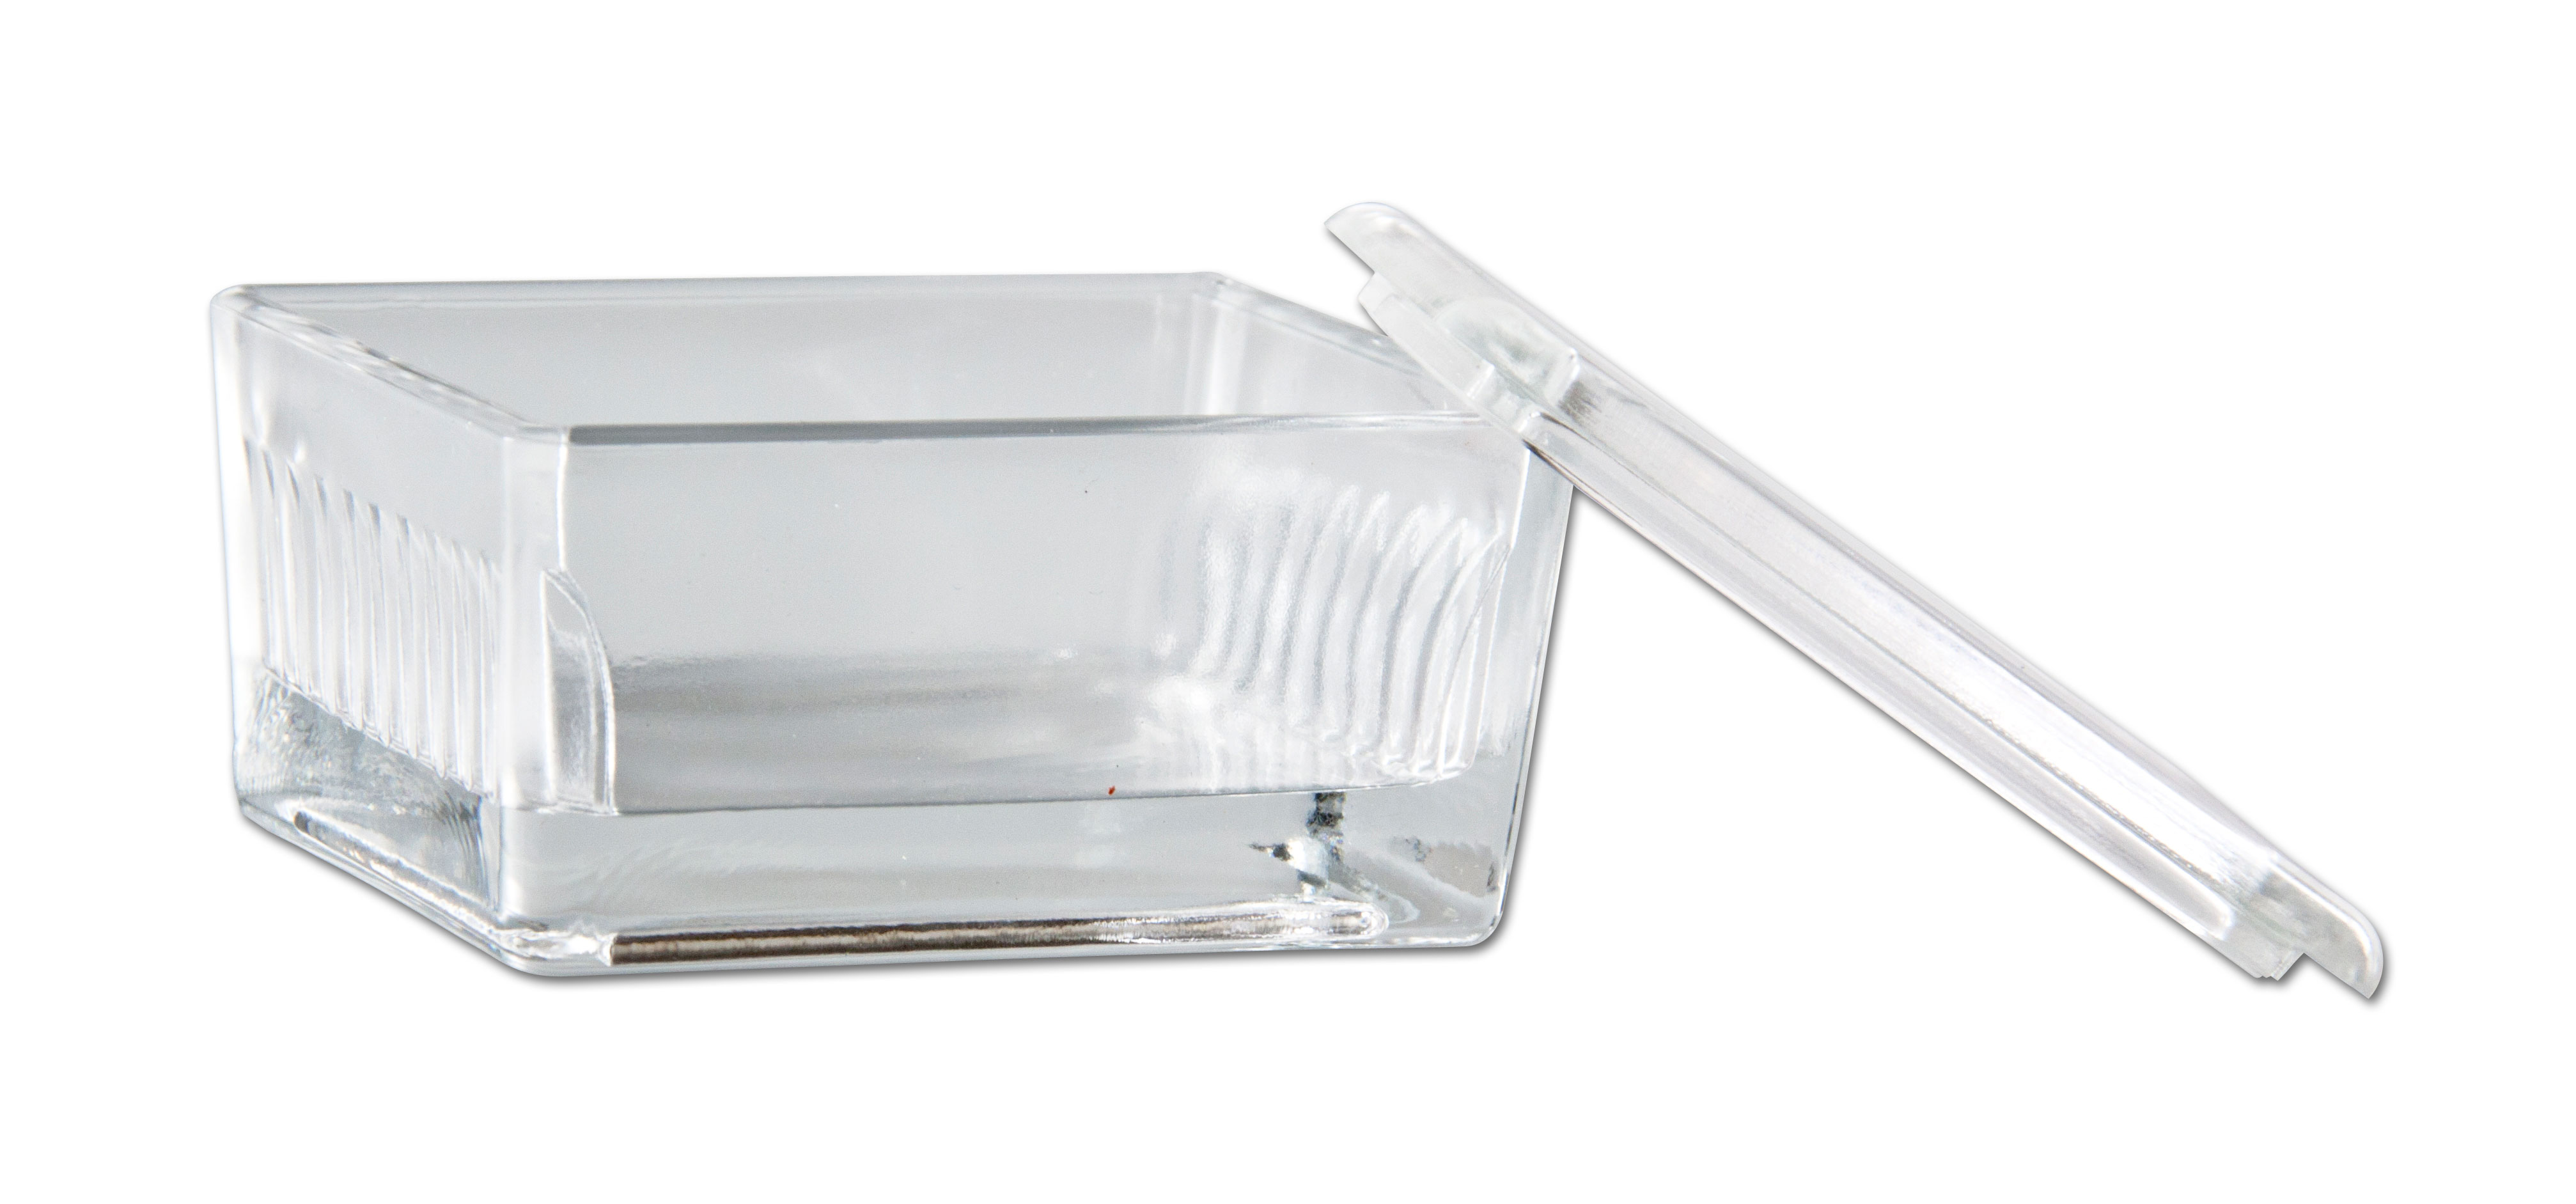 Glass staining cuvette with lid. Type: Schiefferdecker. Capacity (Slides): 10